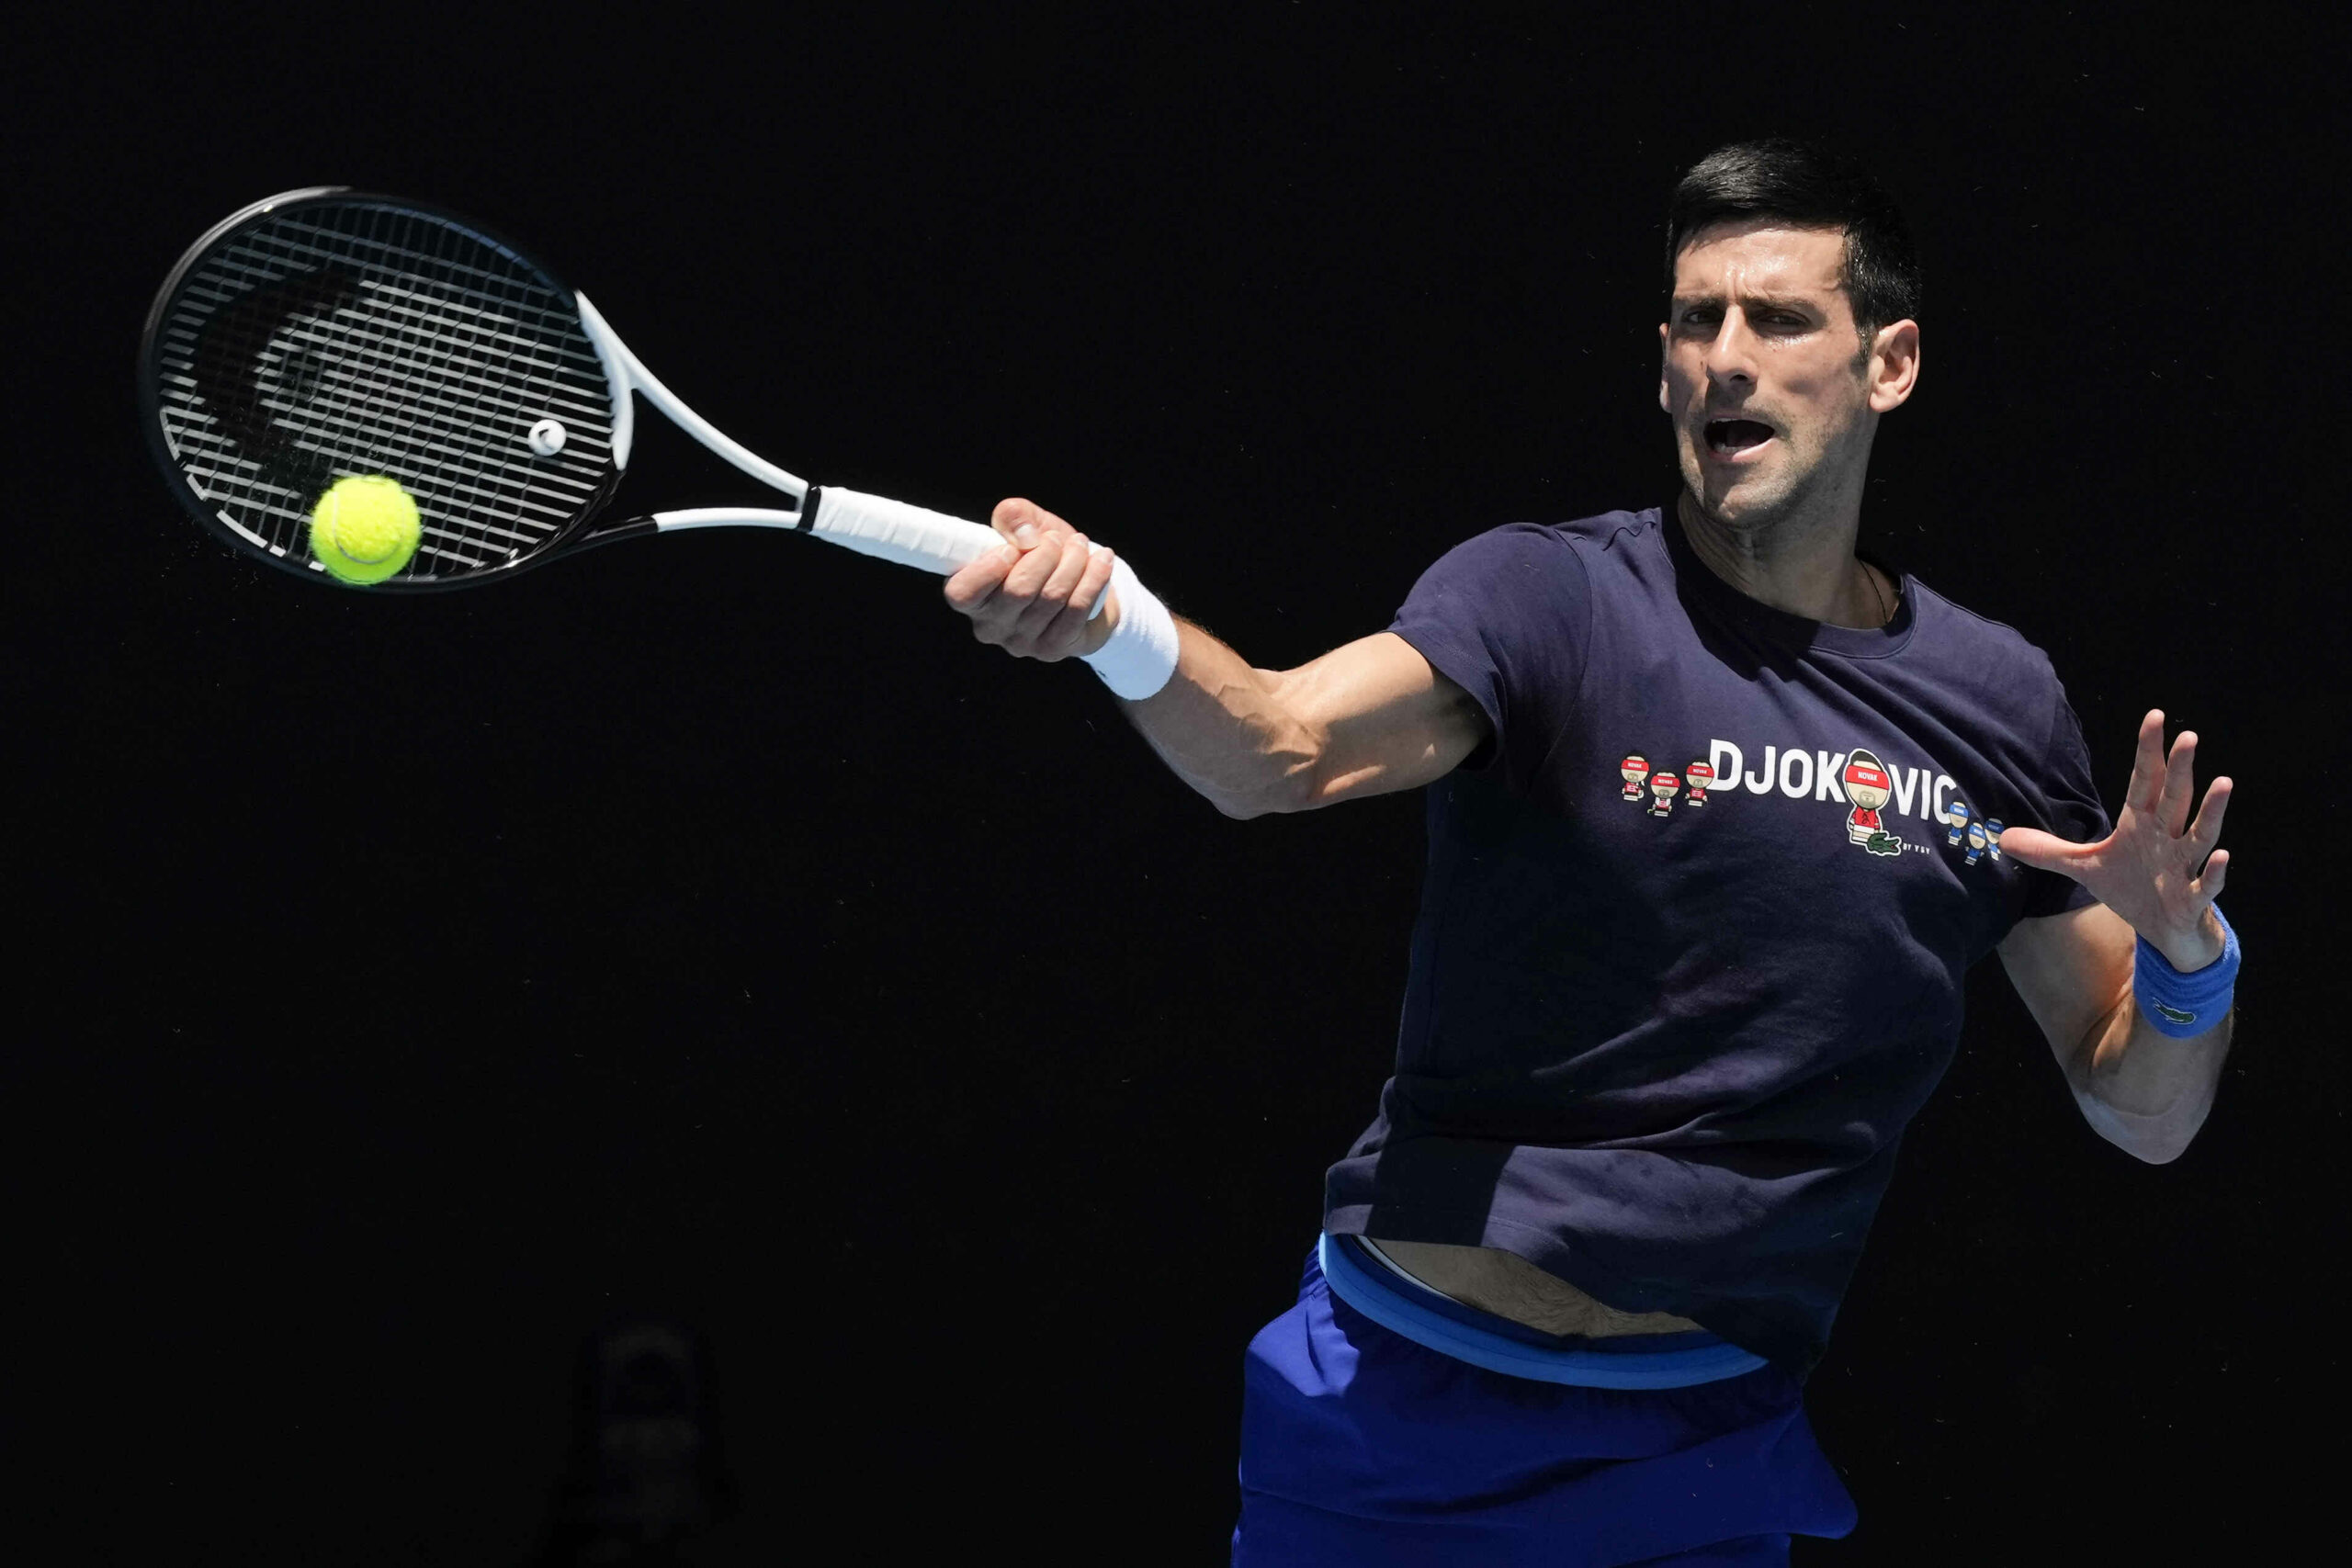 Novak Djokovic's vaccination status remains an obstacle to the US Open